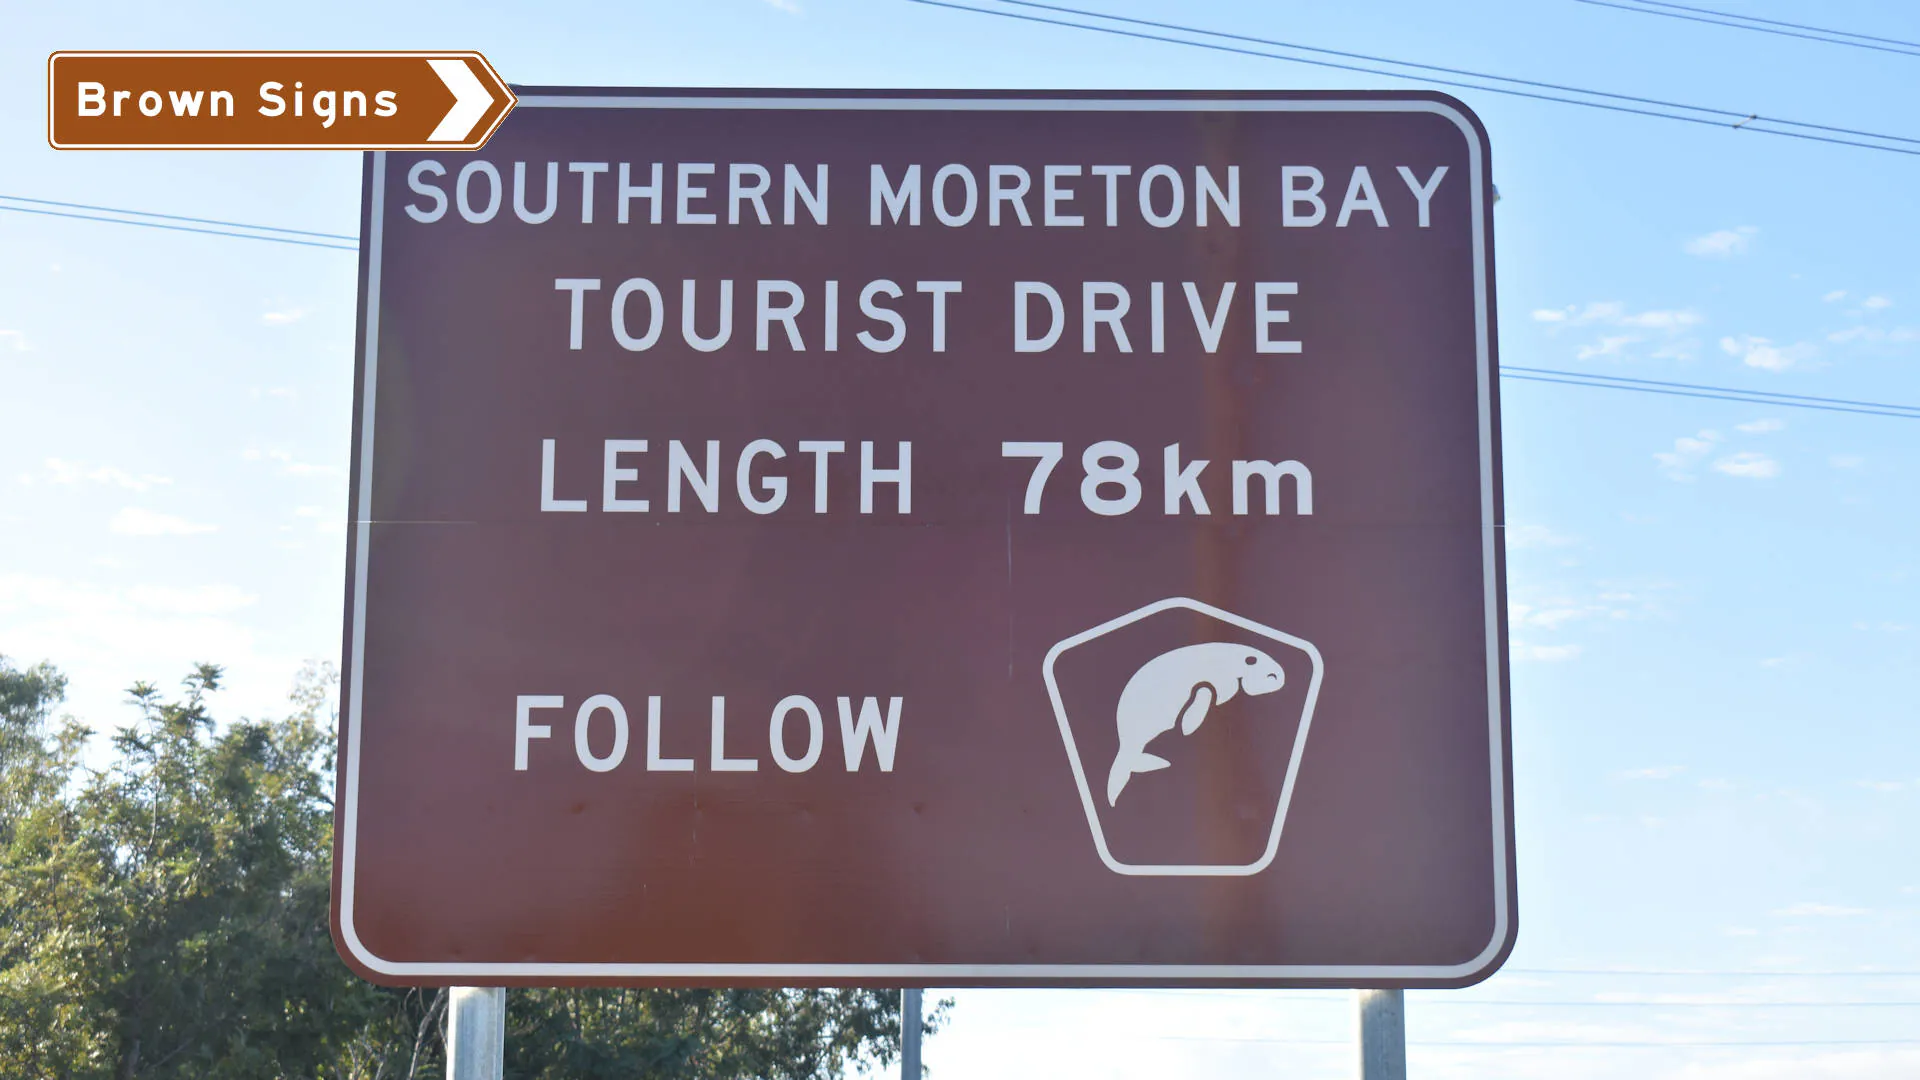 Brown sign showing the start of the Southern Moreton Bay Tourist Drive, length of 78km and a tourist drive symbol of a dugong